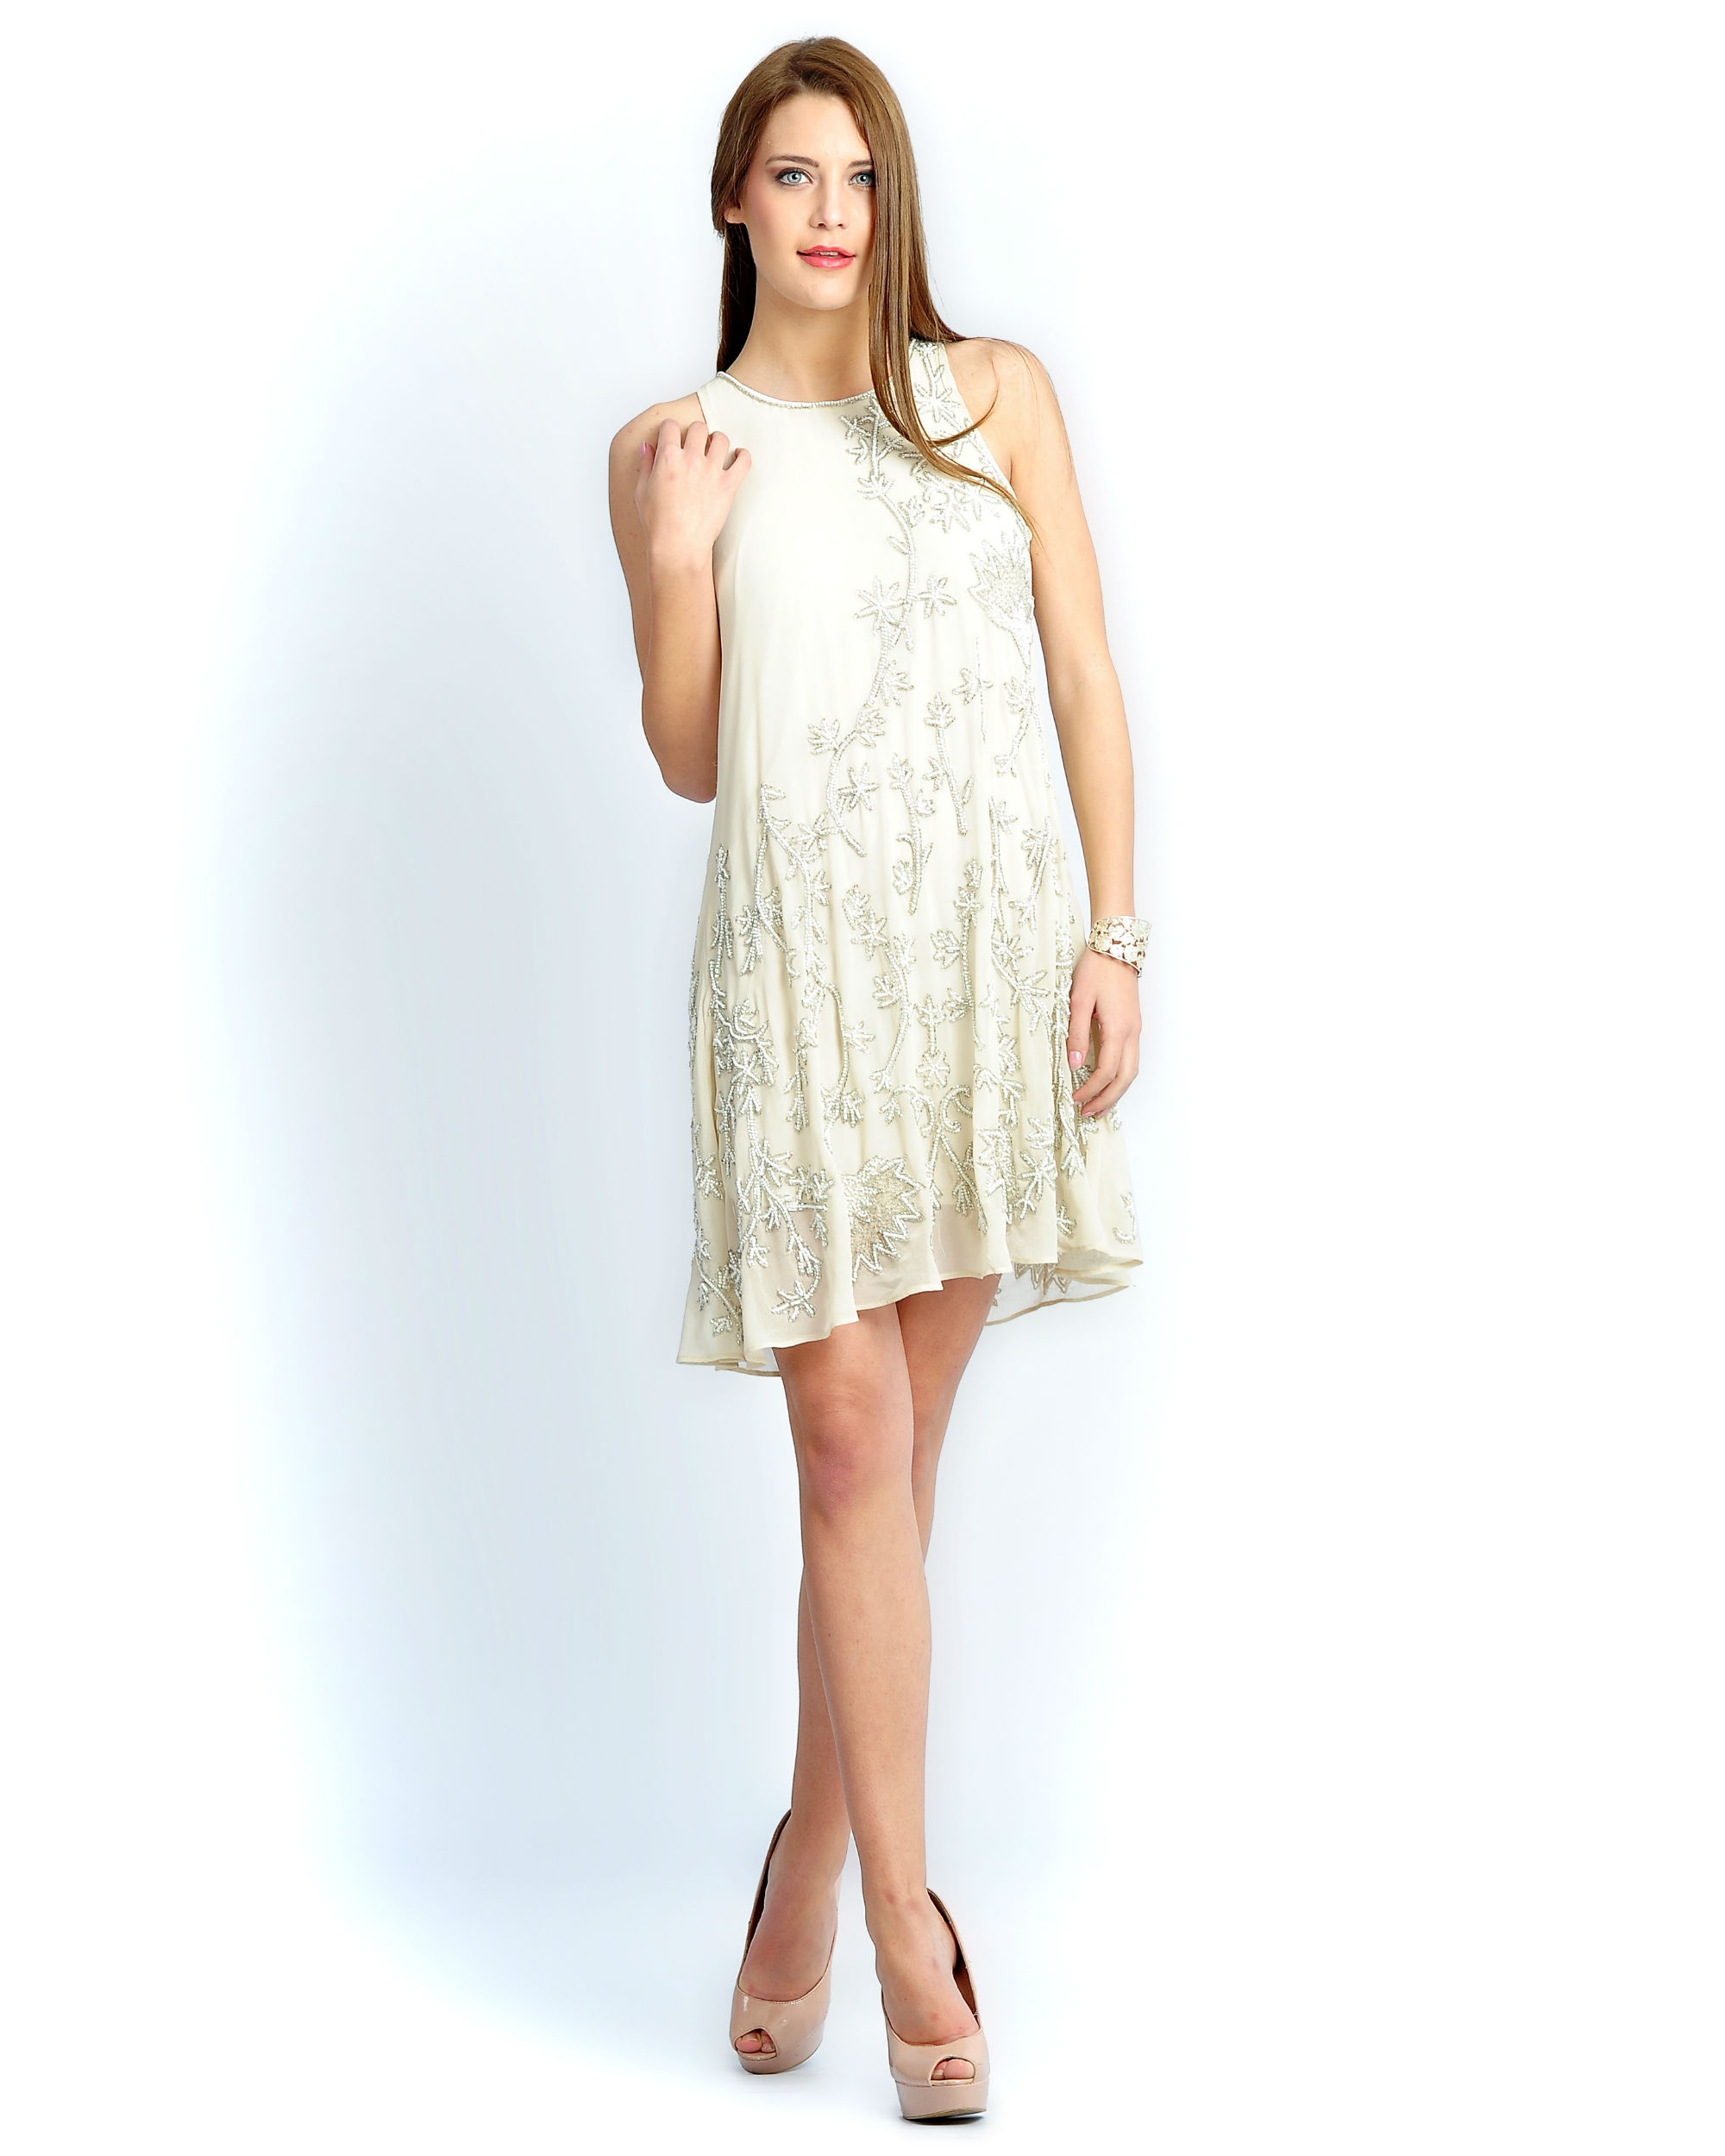 Ivory beaded dress by Chique | The Secret Label